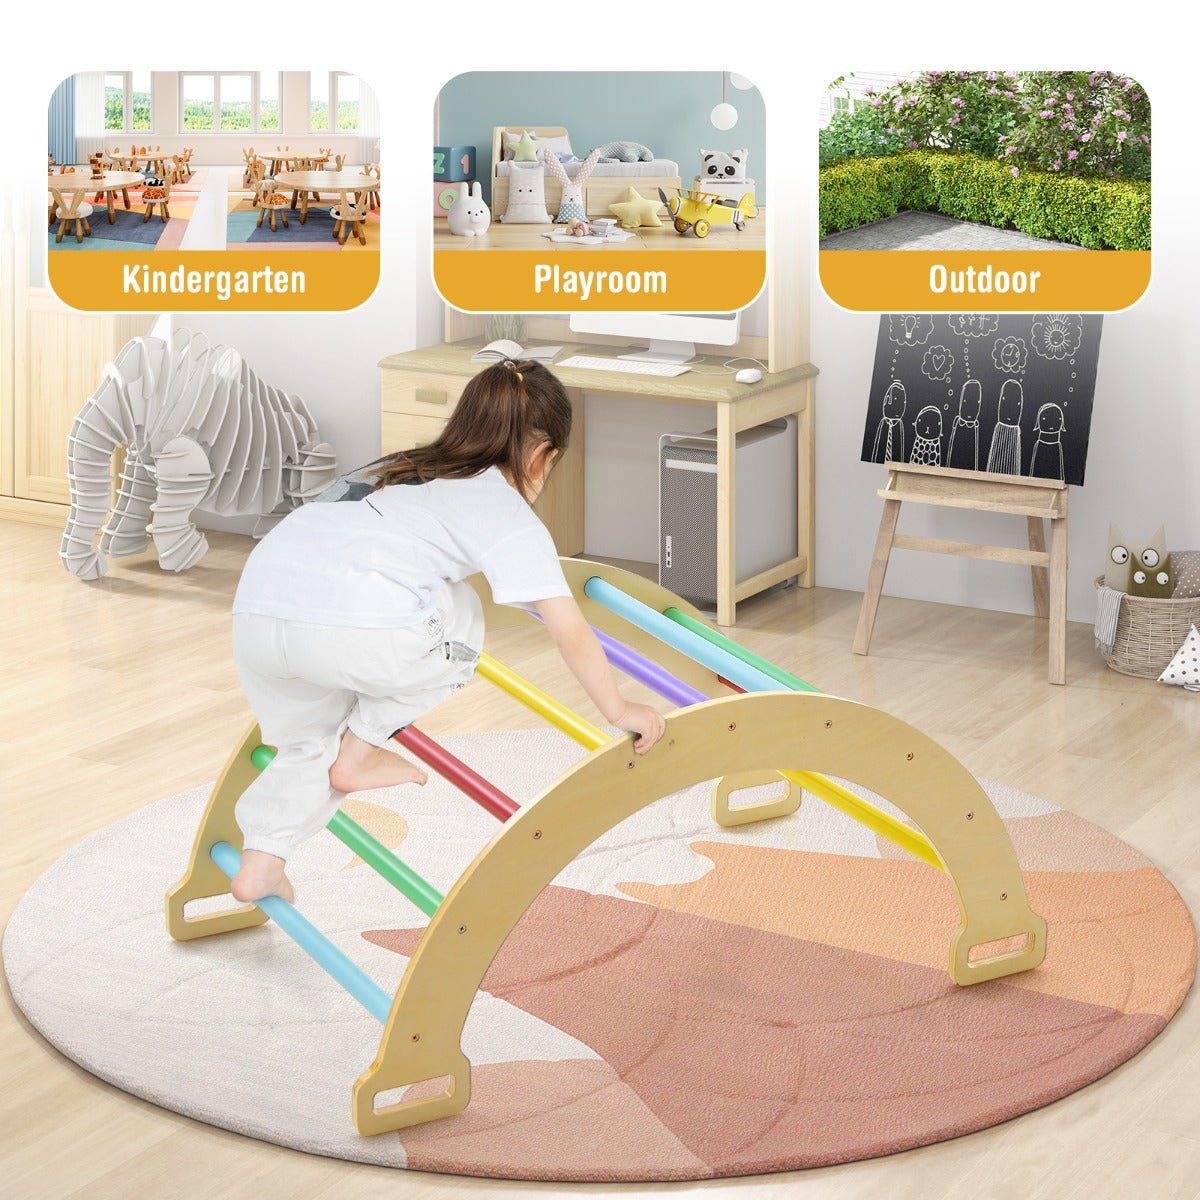 Shop Now for the 3-in-1 Wooden Arch Rocker